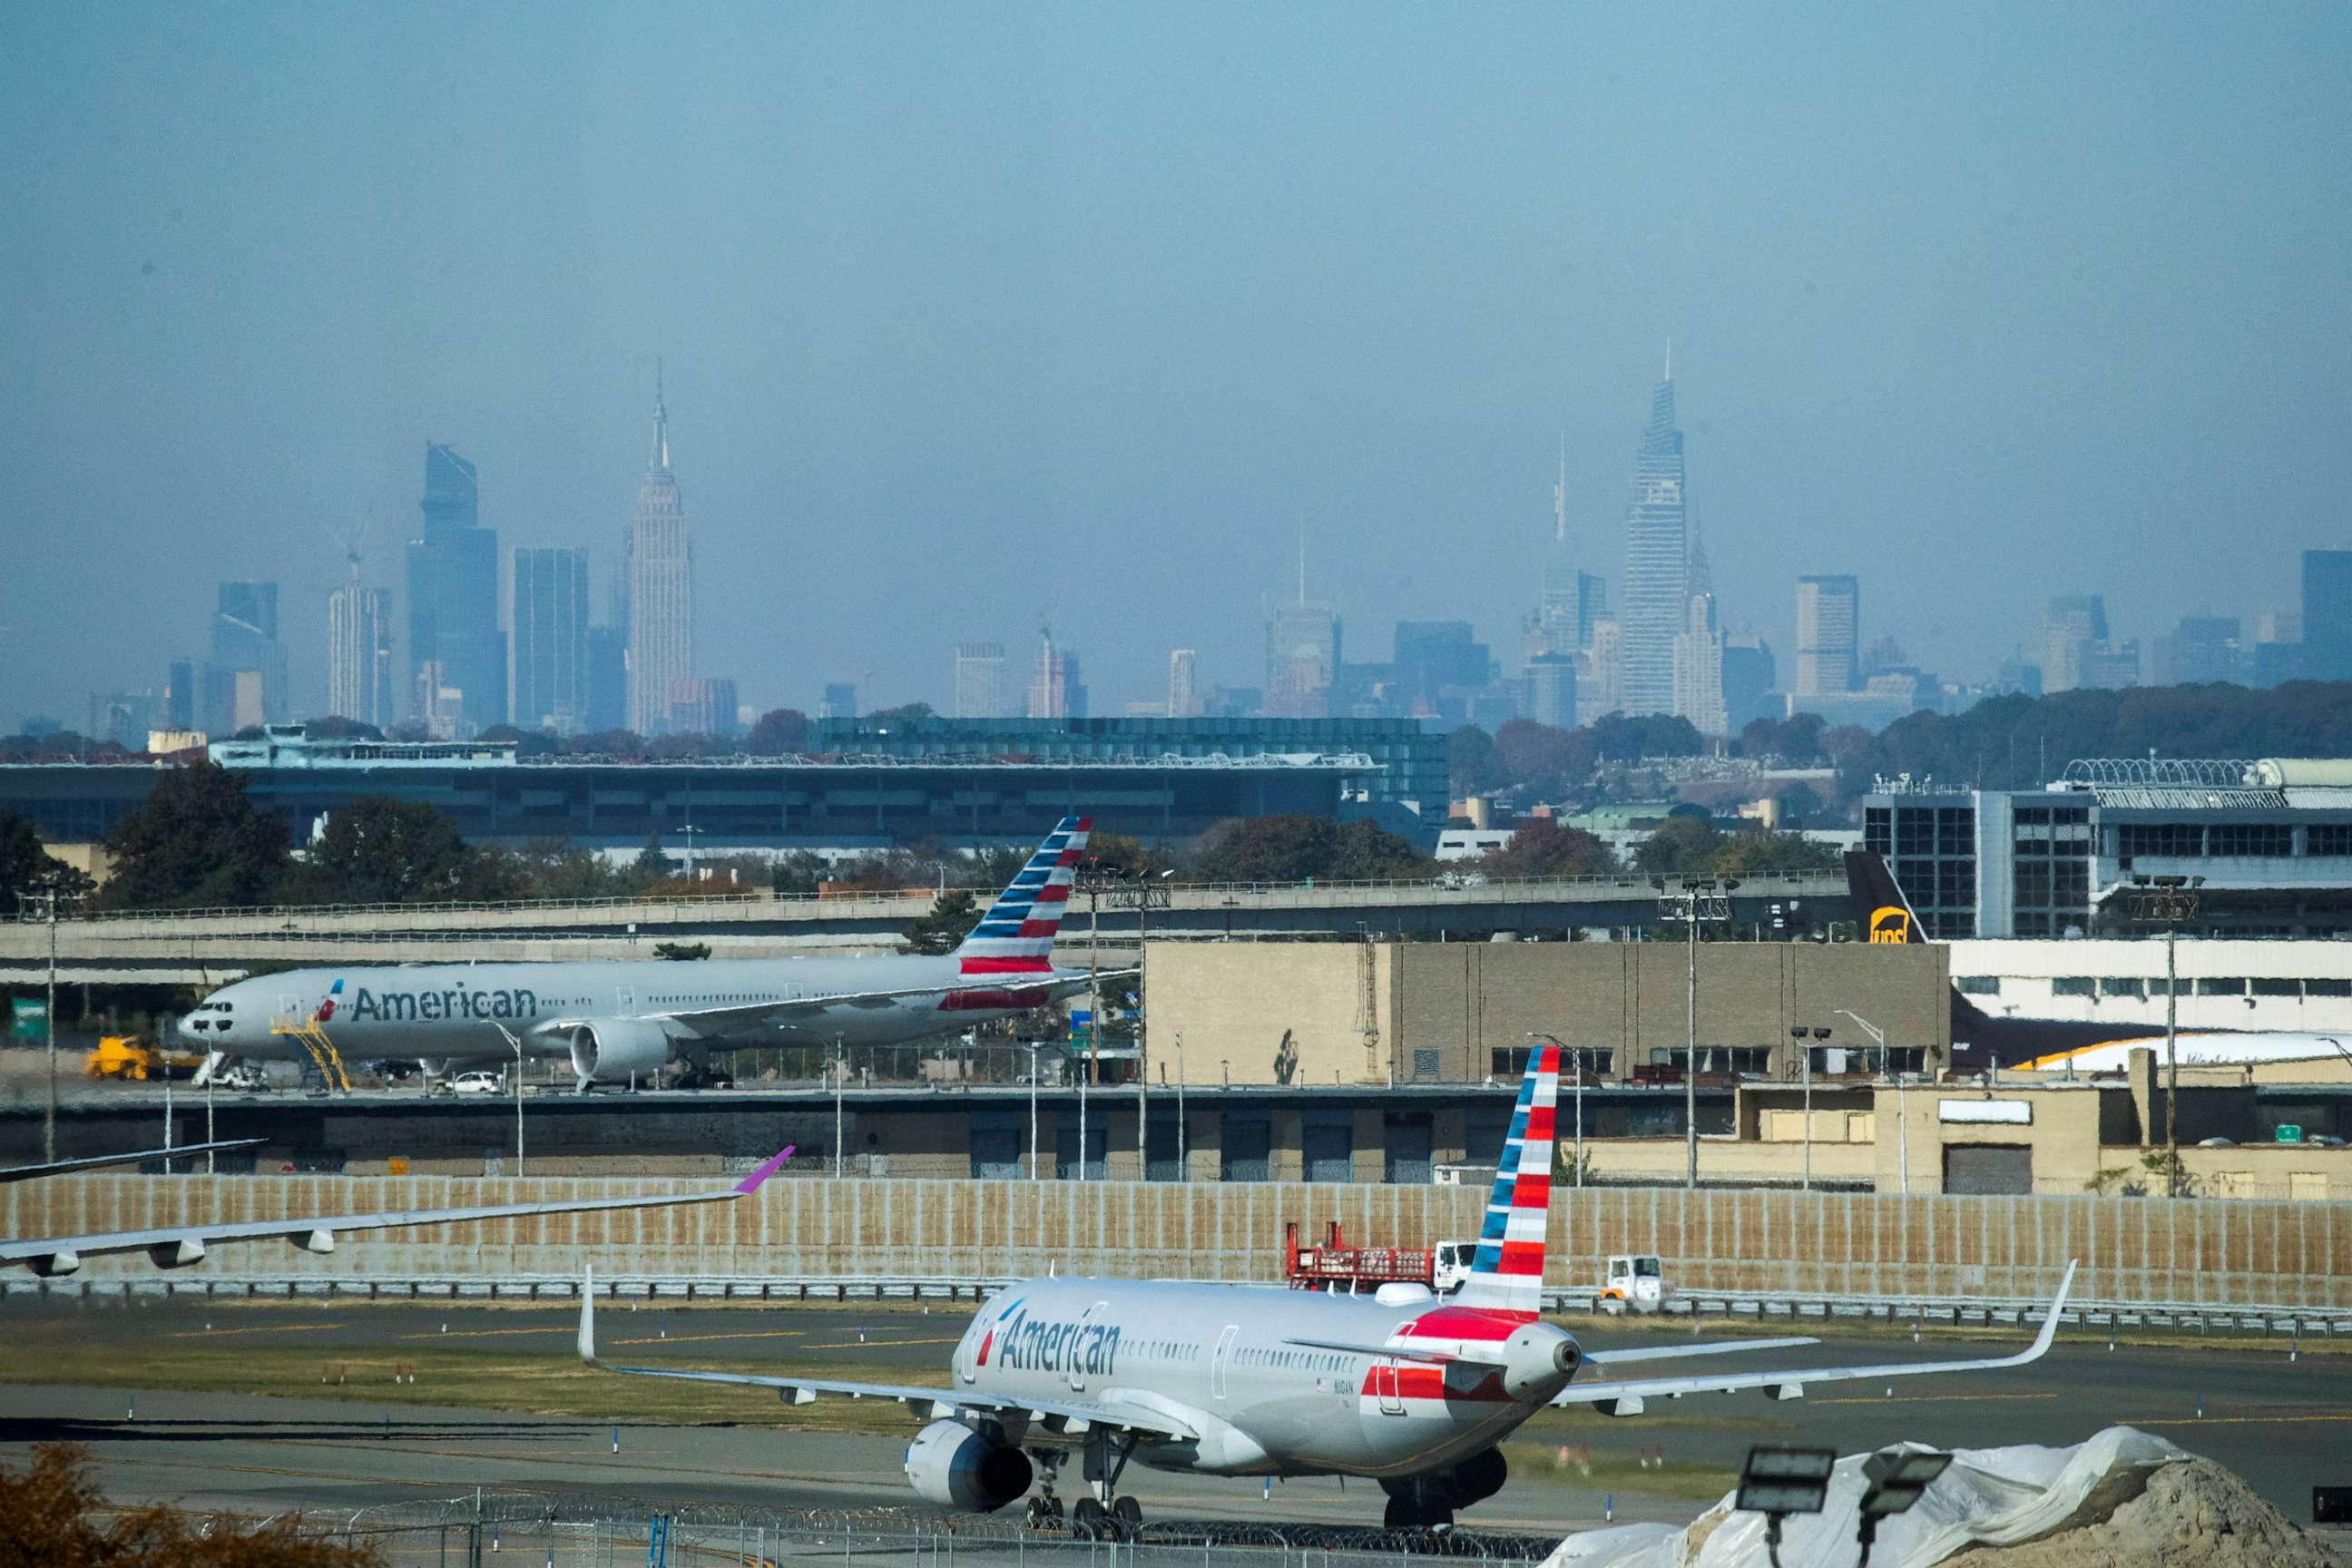 PHOTO: Planes taxi on the tarmac as the skyline of New York City is seen in the background from the JFK International Airport in New York, Nov. 8, 2021.